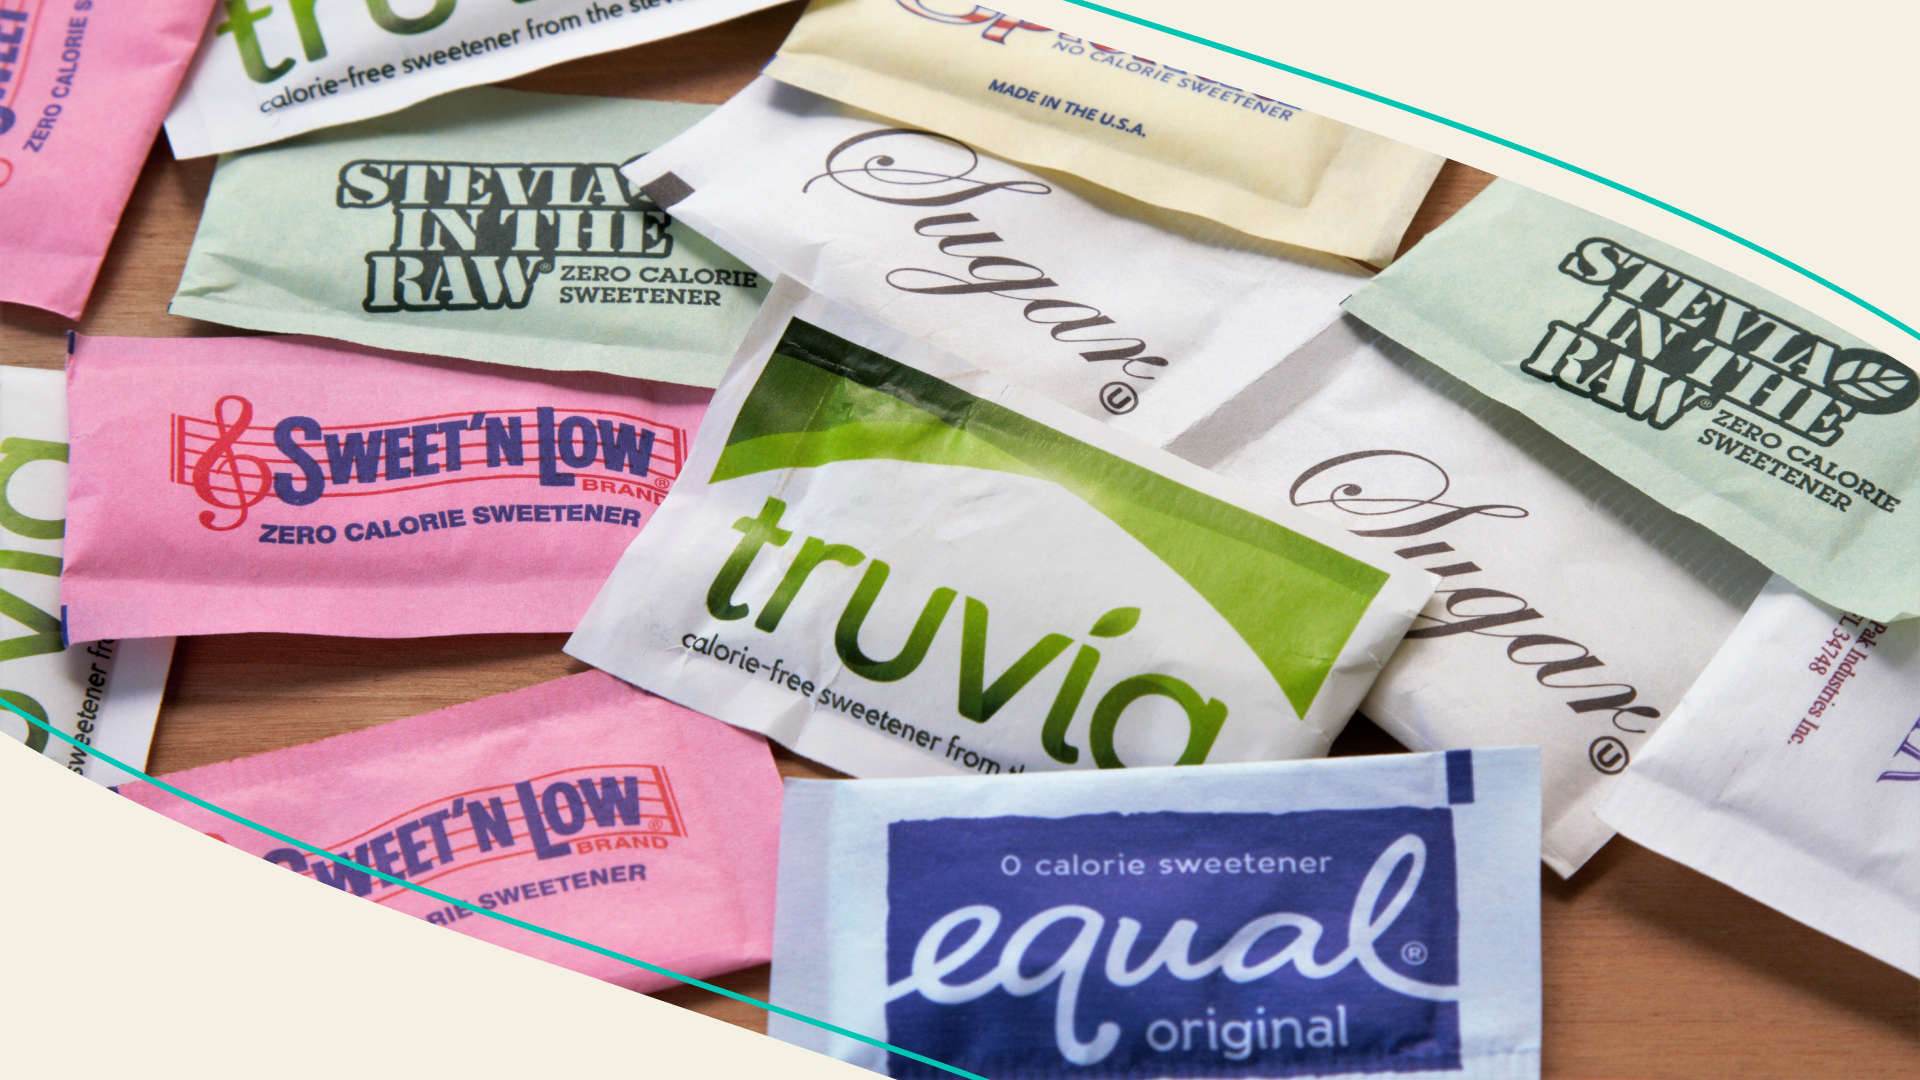 Packets of sugar substitutes and artificial sweeteners including equal, stevia, truvia, 